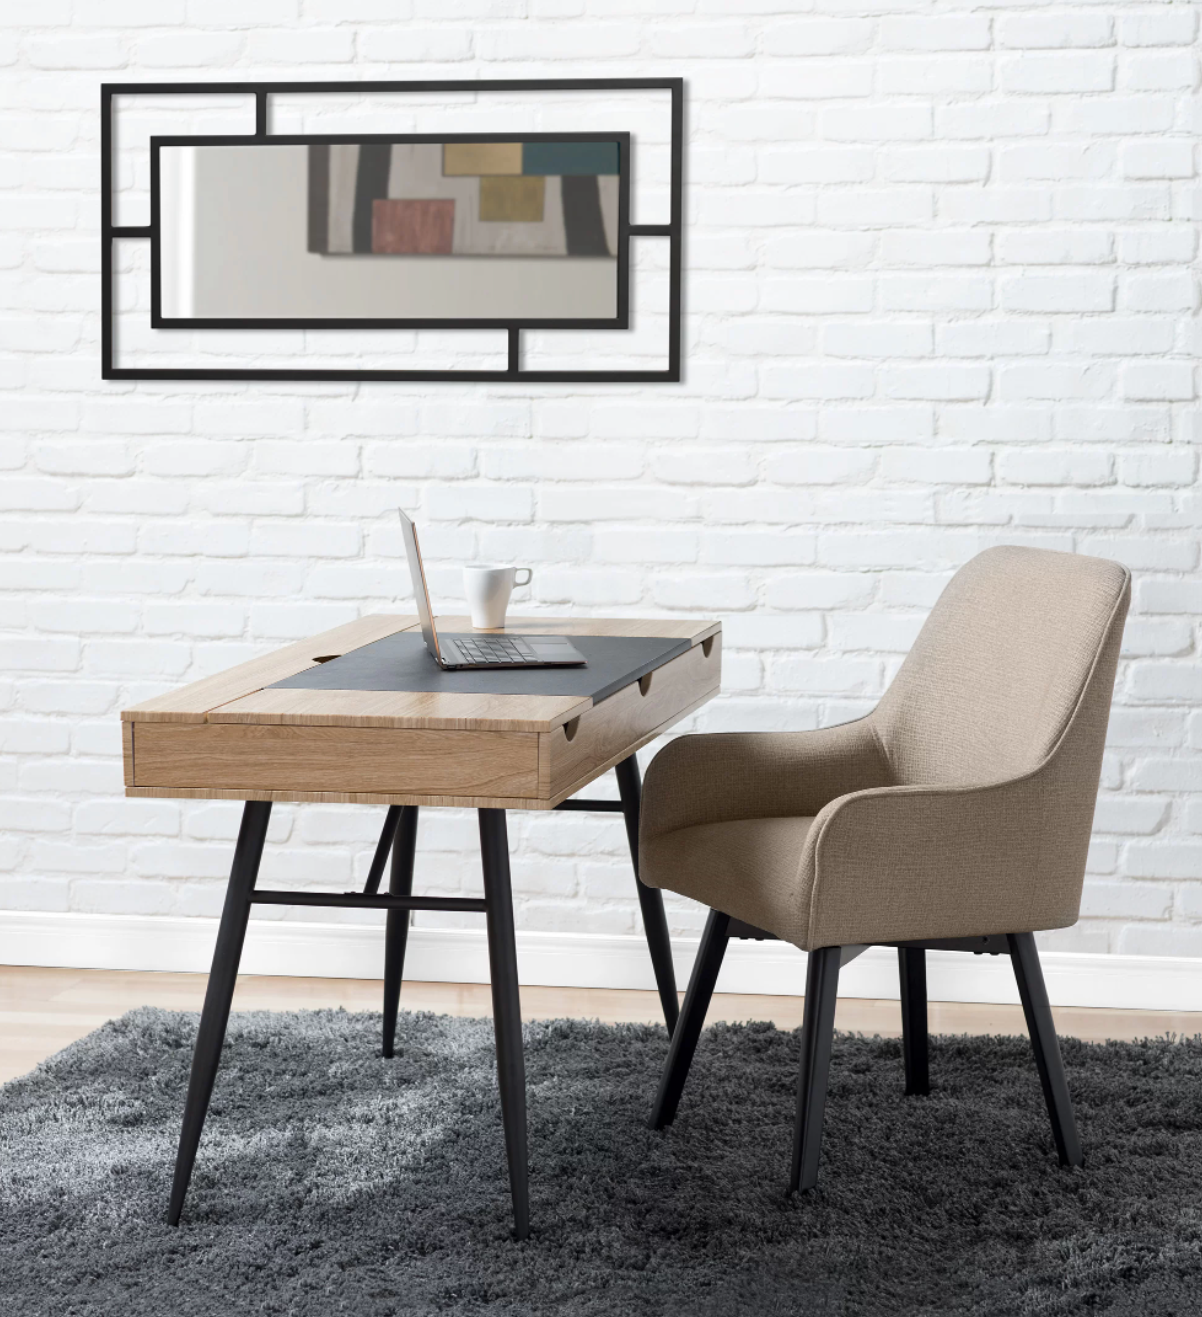 Tan upholstered chair with black legs on gray fluffy carpet in front of wooden desk